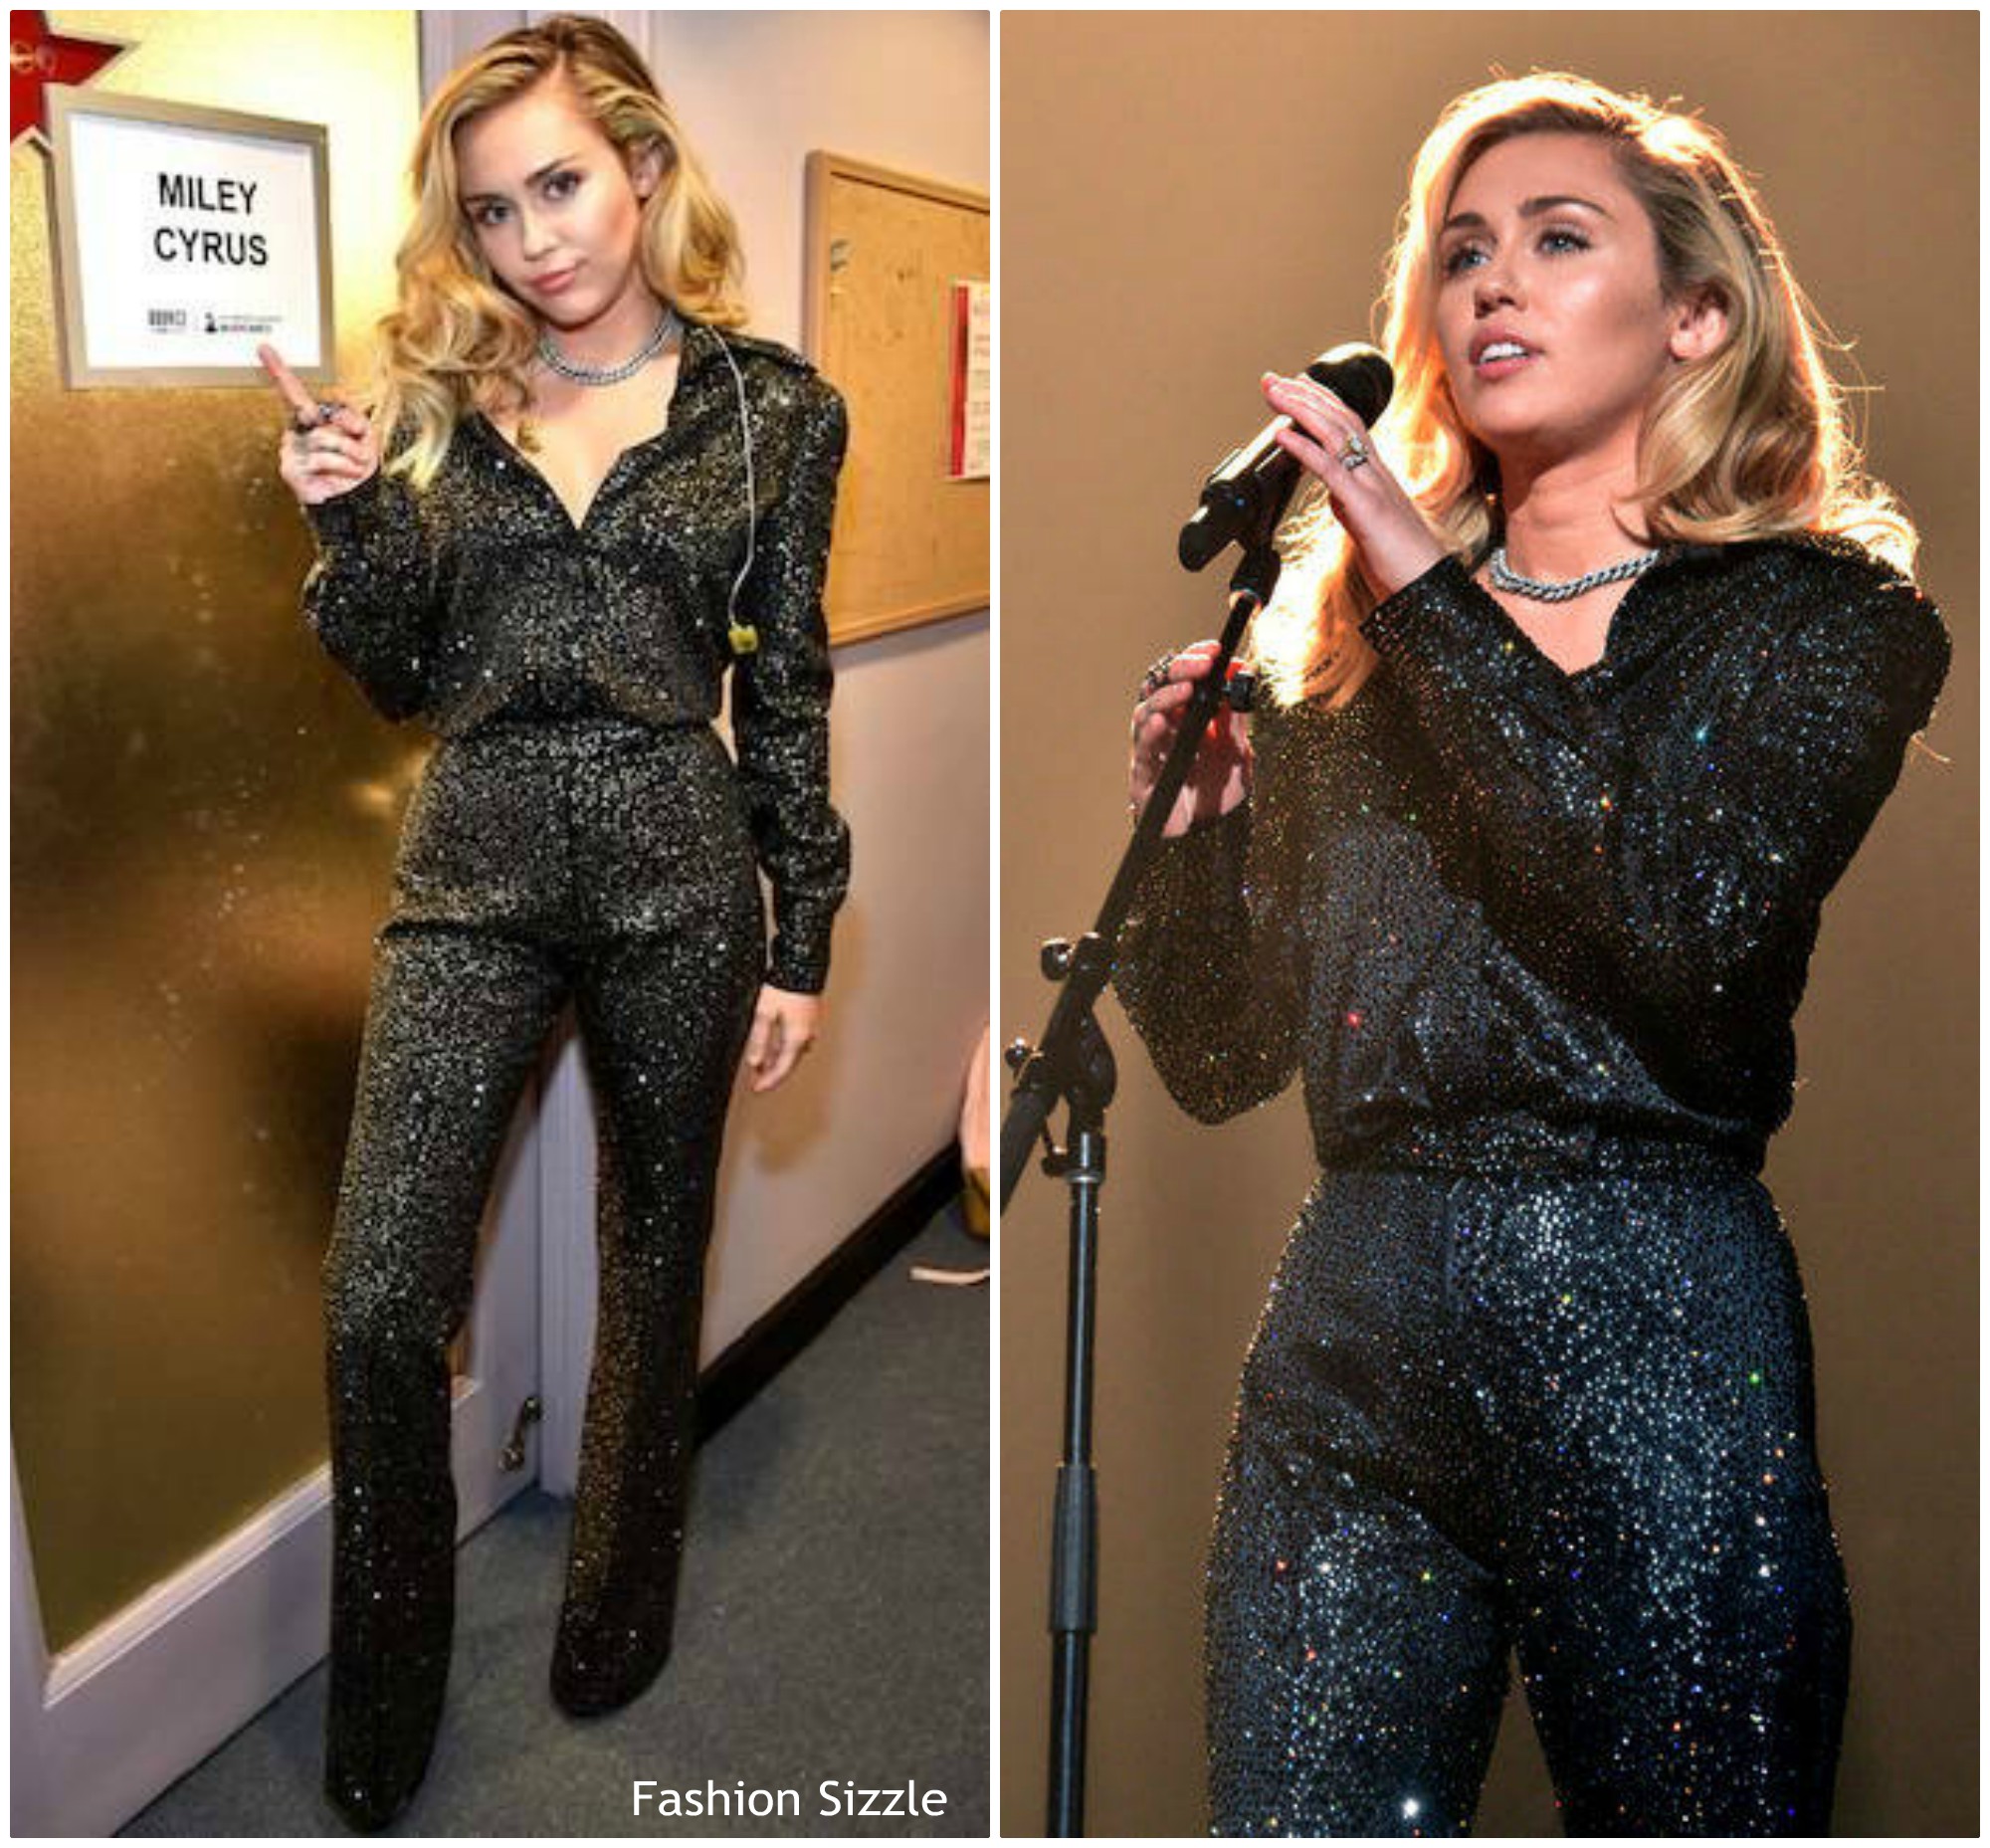 miley cyrus in august getty atelier 2018 musicares galain new york